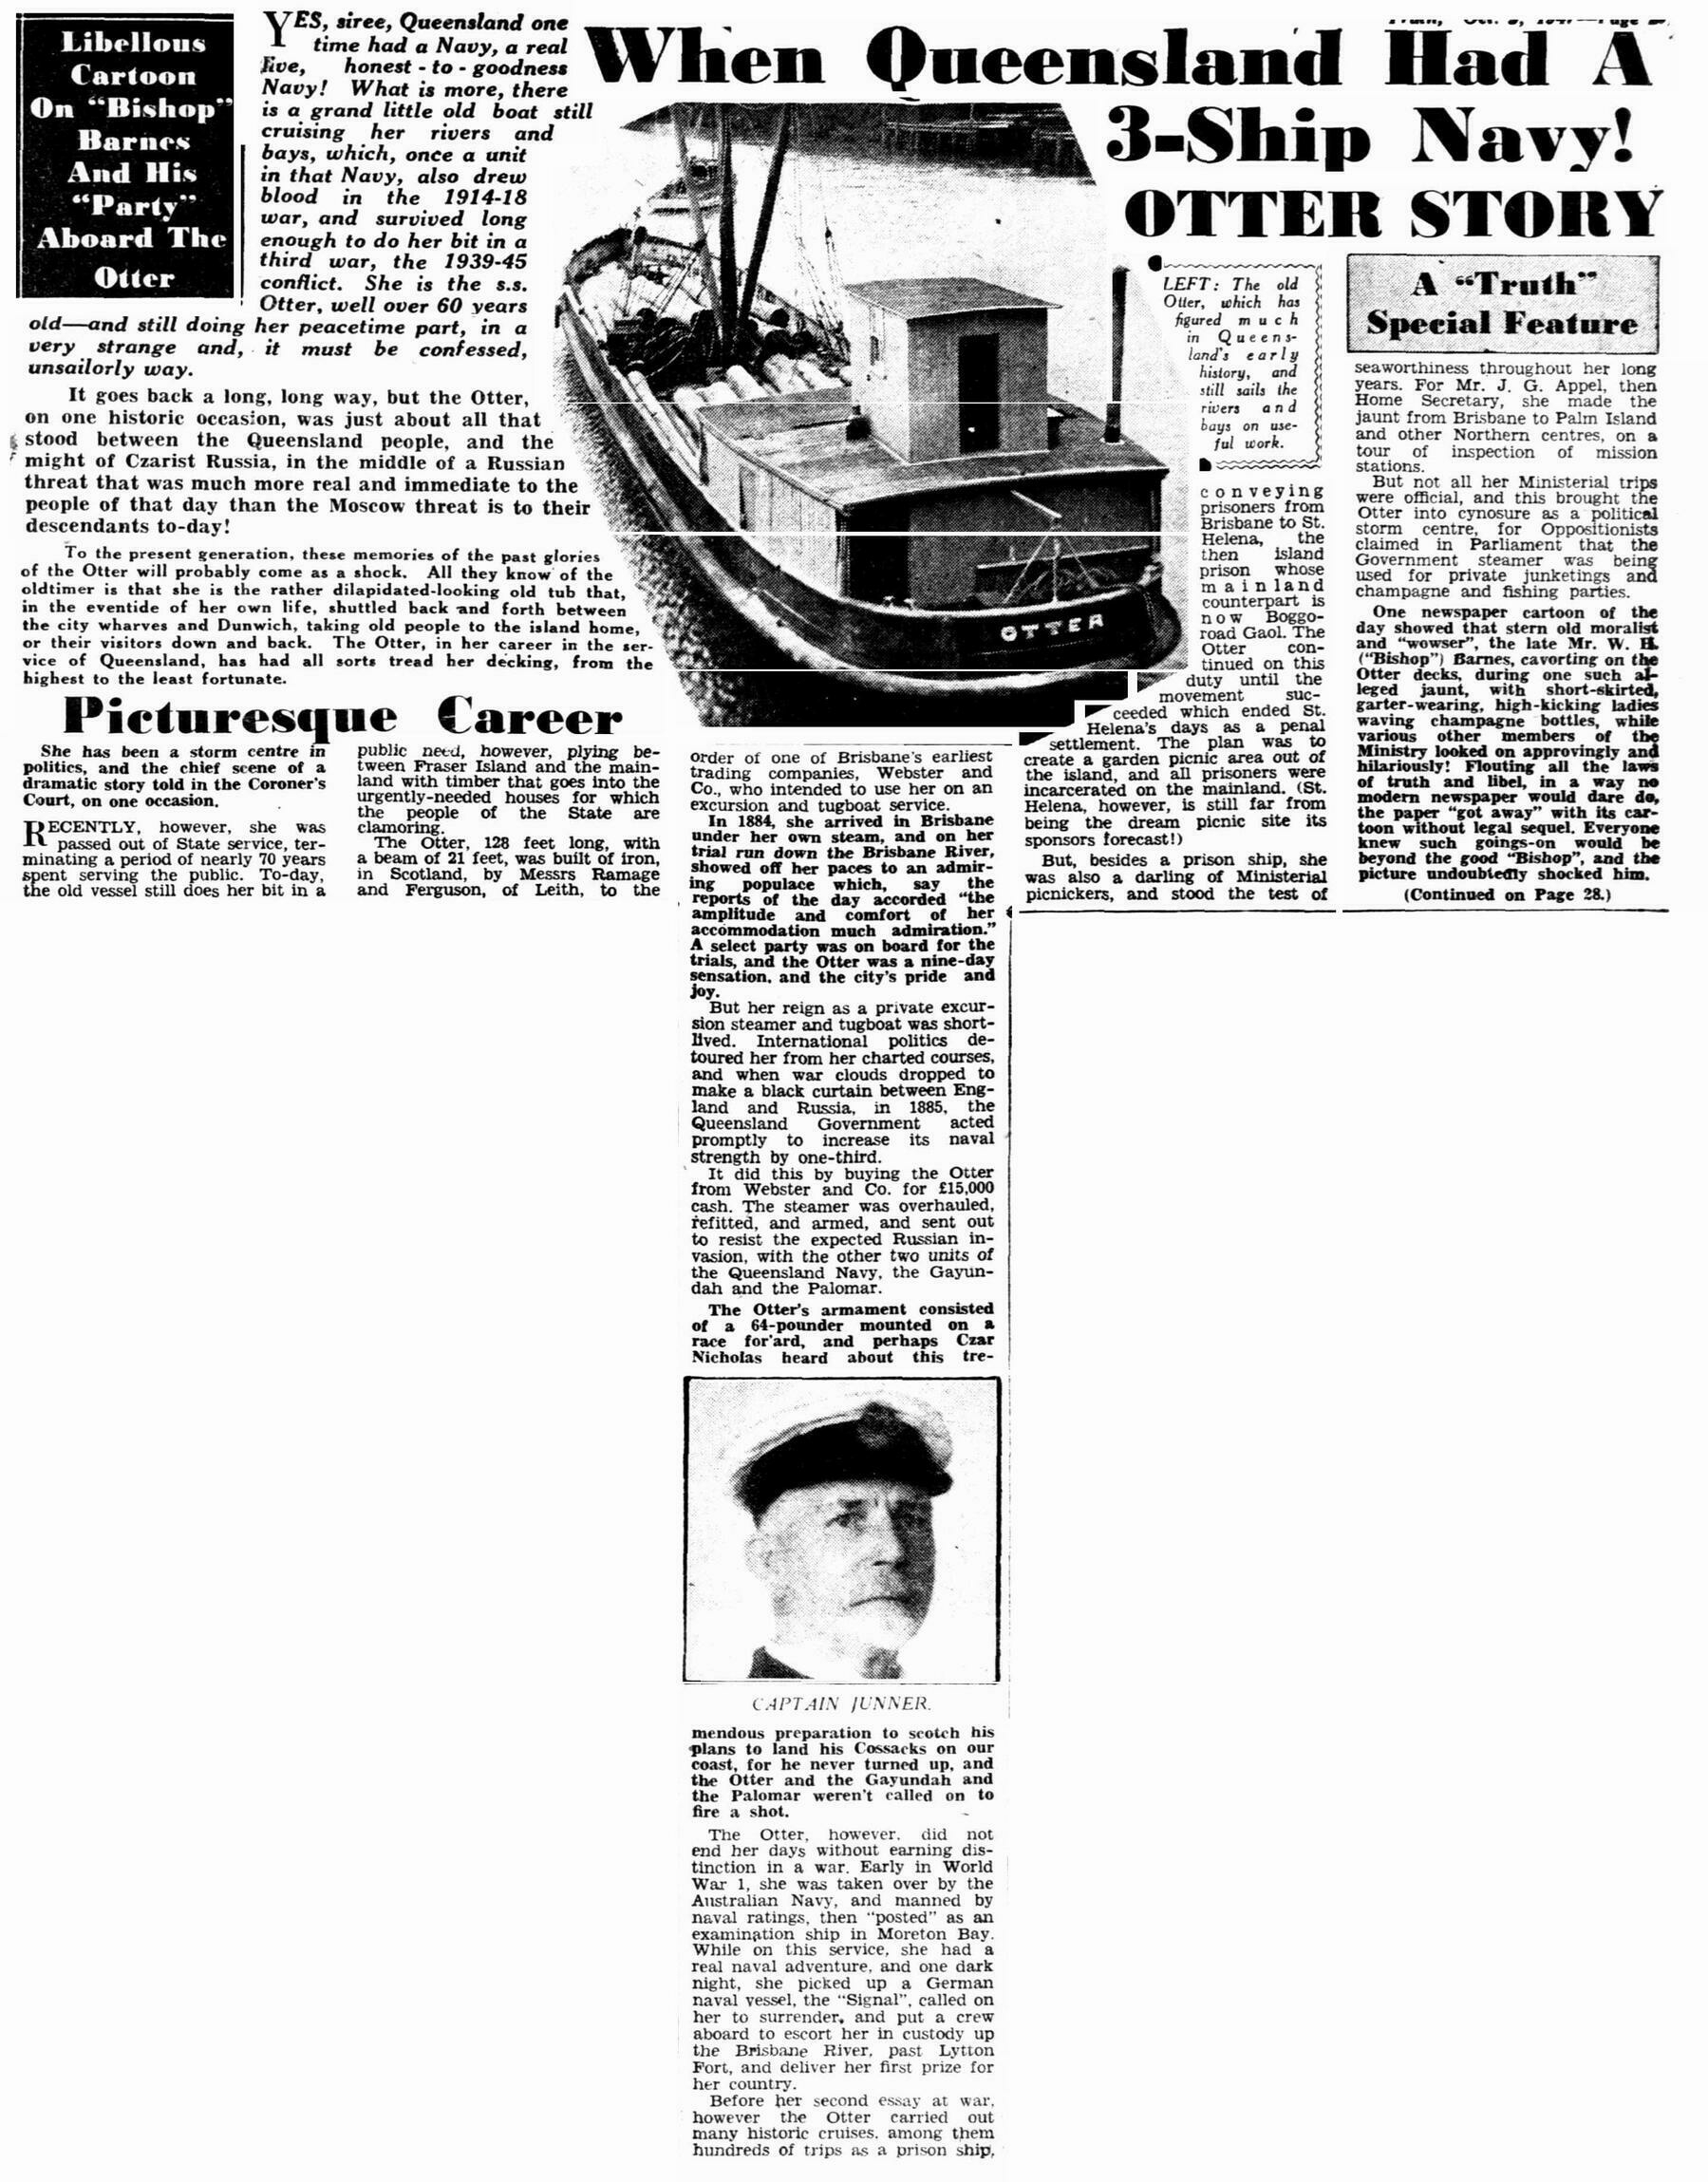 Image of newspaper article as it appeared in the published newspaper, with the central column extending well below the main body of the article